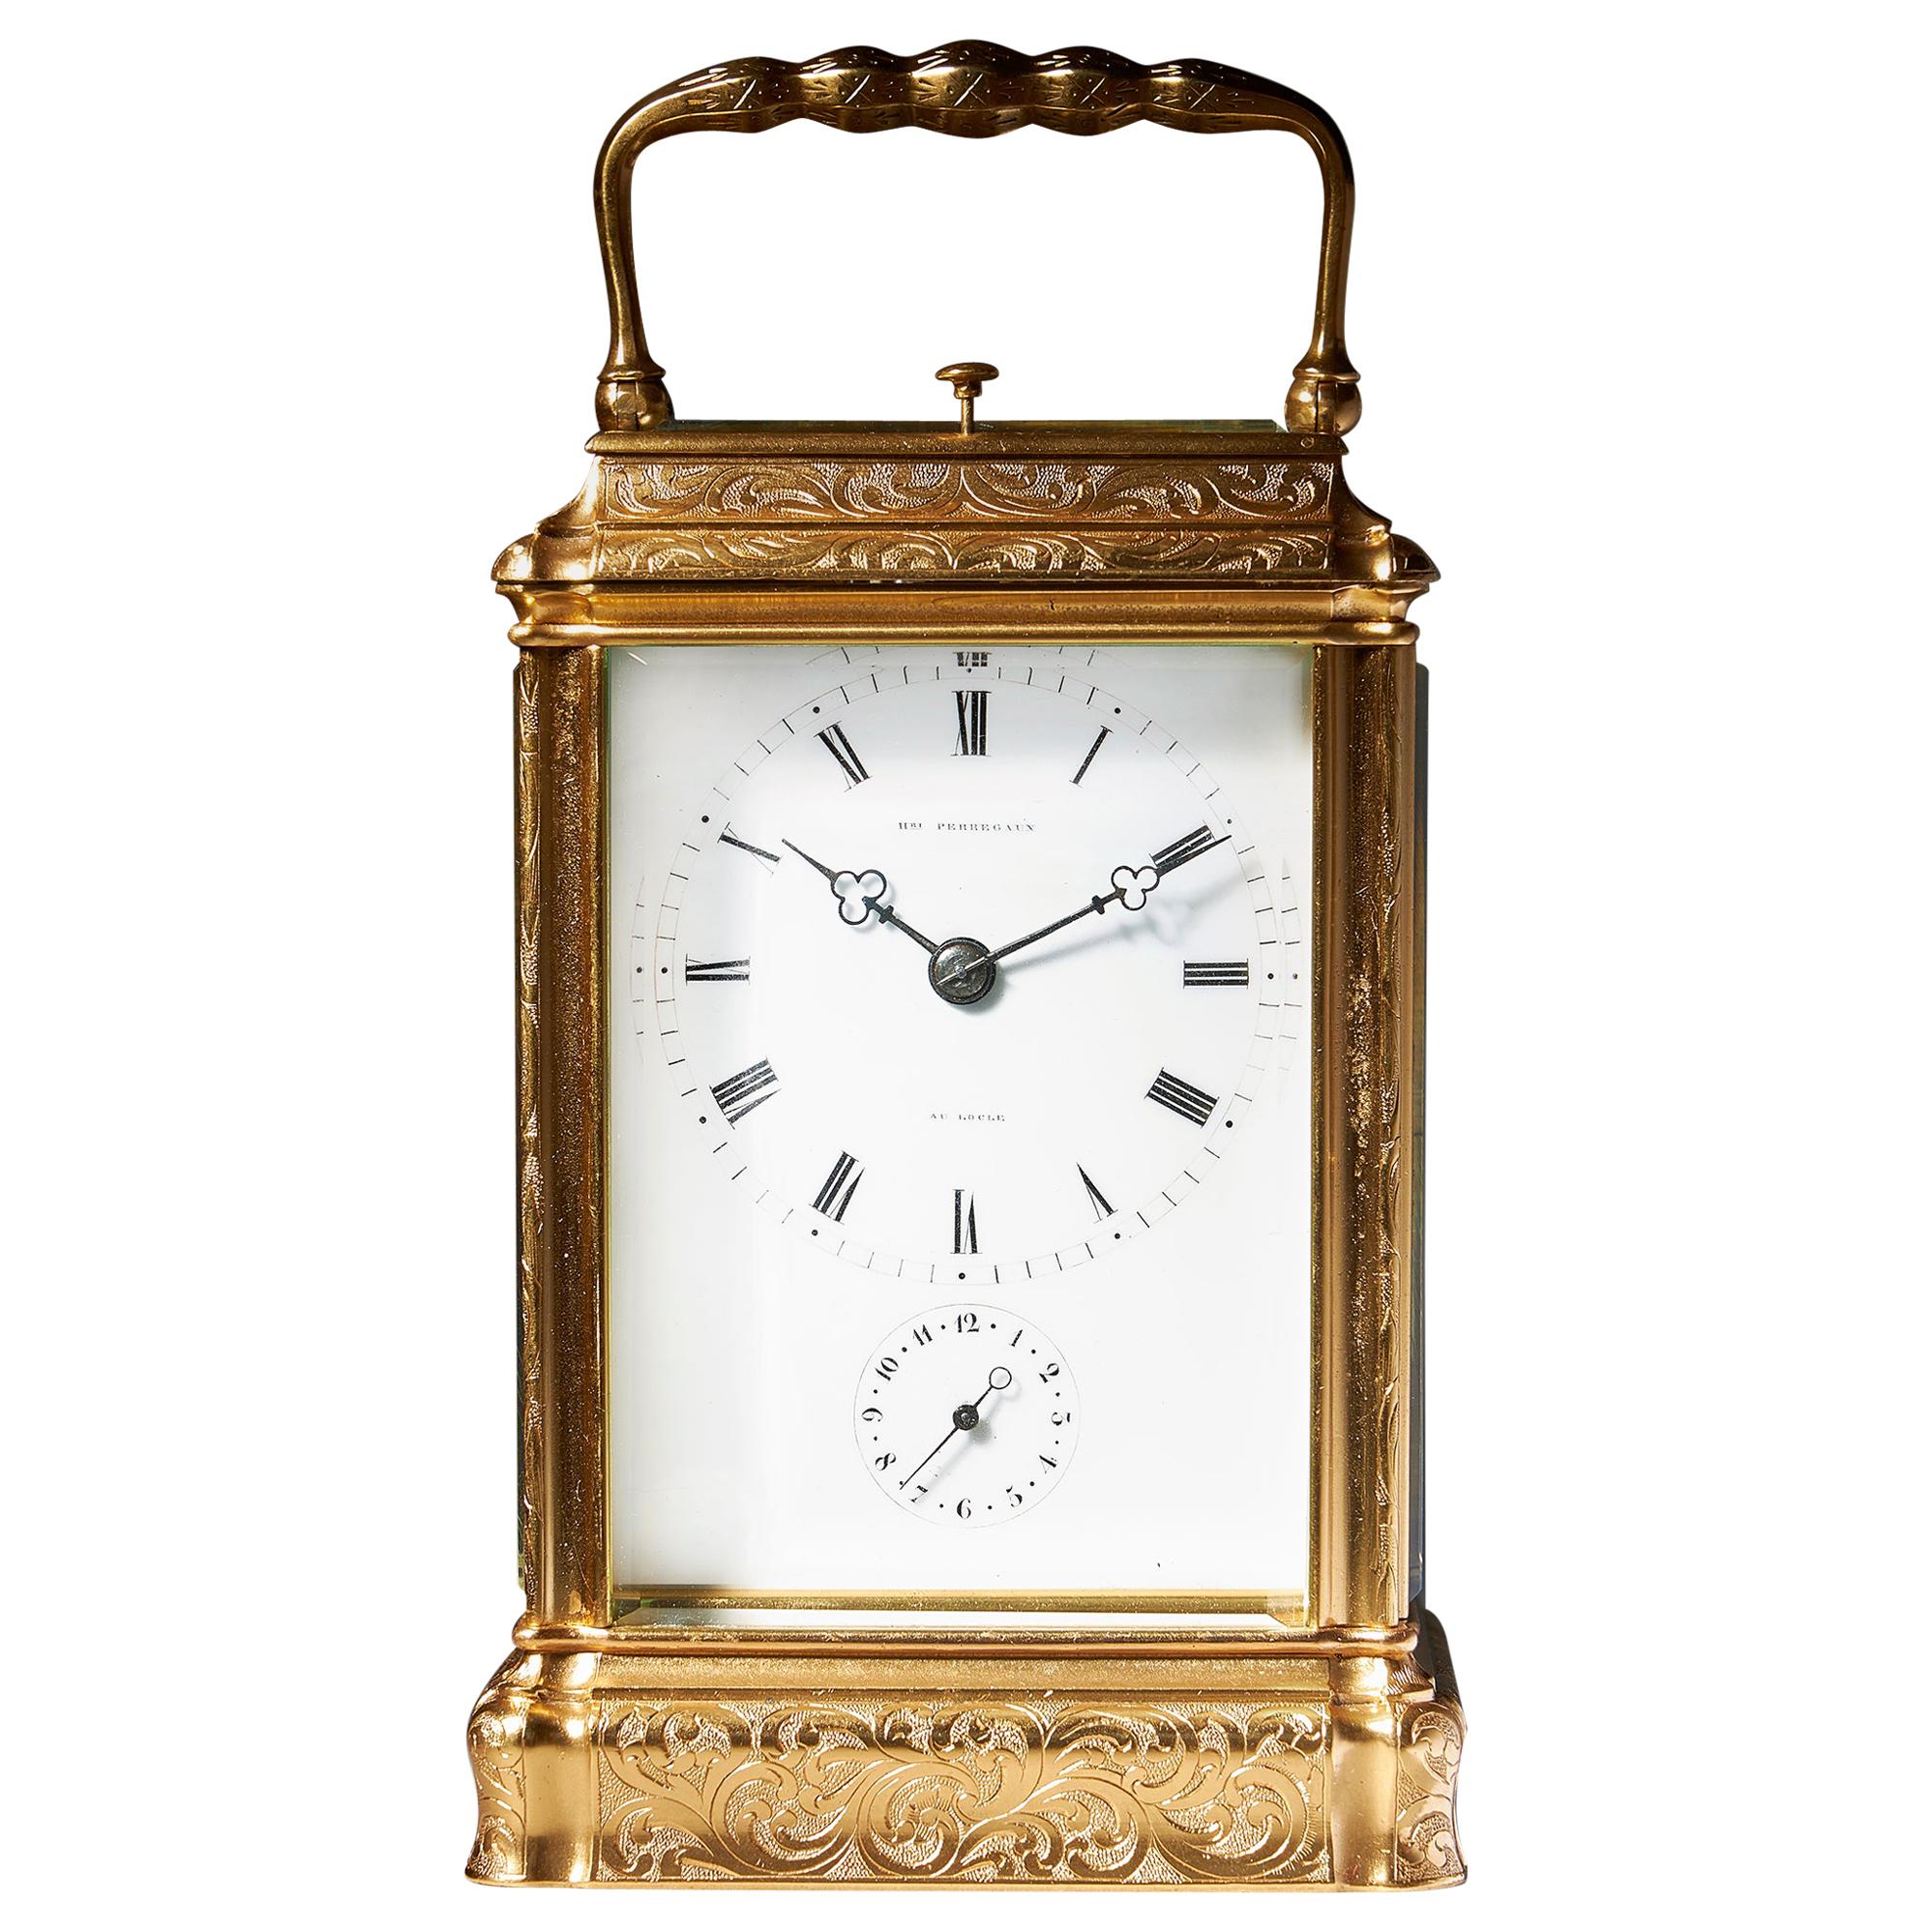 Engraved Eight-Day Striking and Repeating Carriage Clock by Perregaux Au Locle